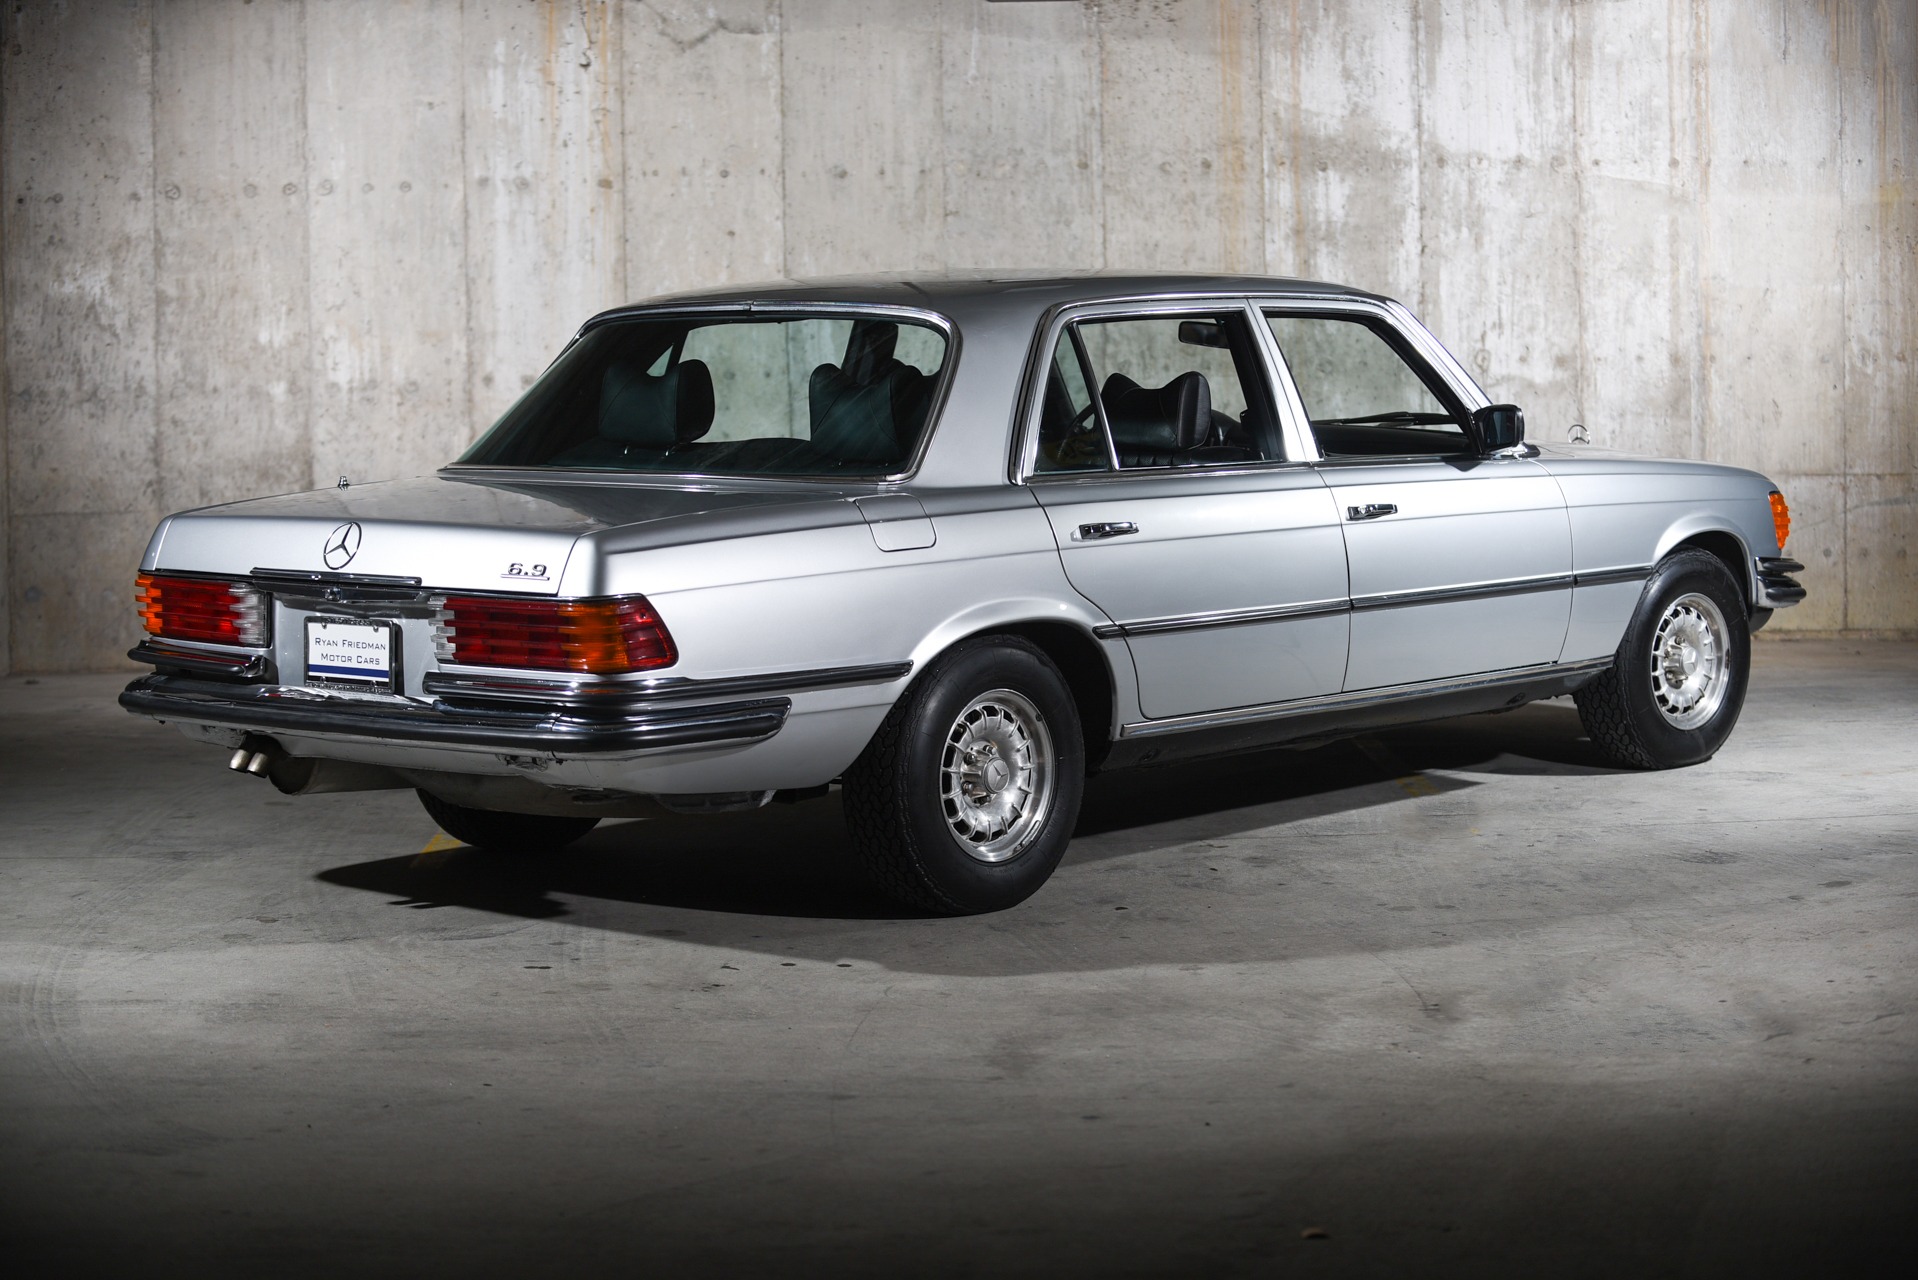 Mercedes-benz 450 SEL AMG 6.9 W116 1978 Gray Metallic 1/43 GLM 206001 for sale online 